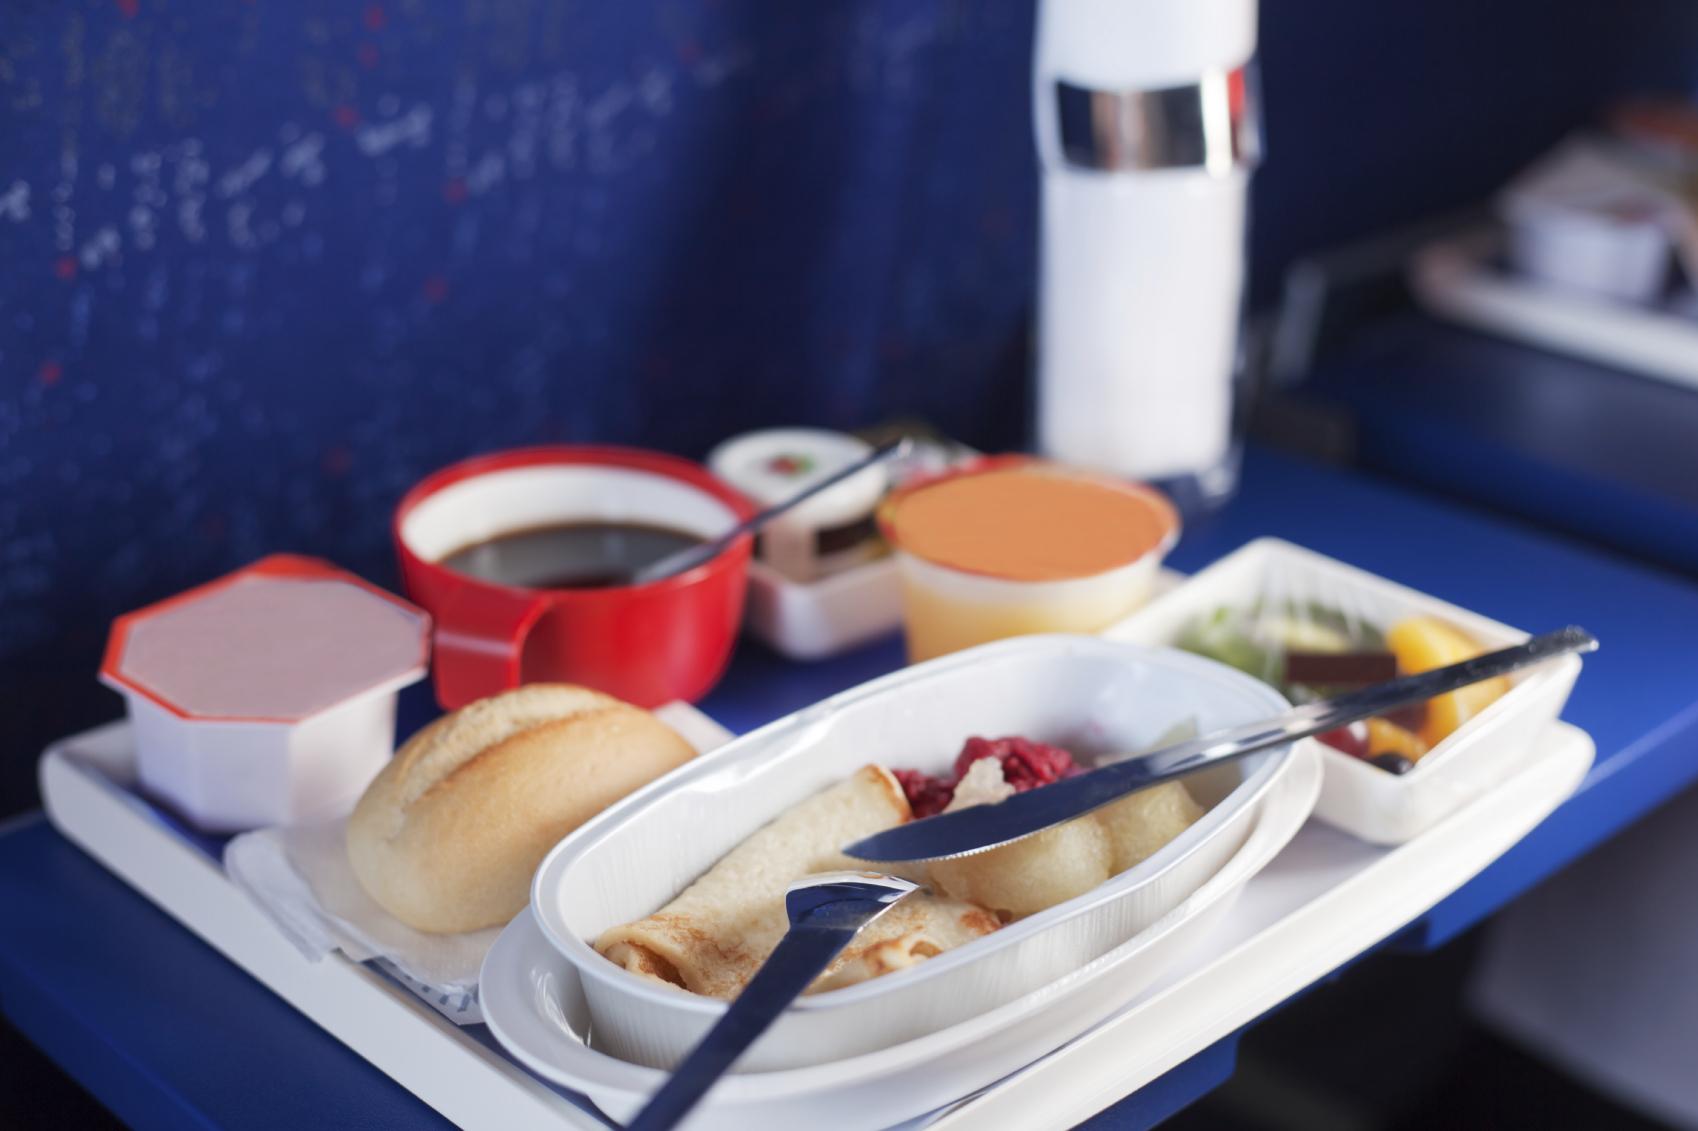 Tray of food on the plane. Focus on a plastic cruet stand with p